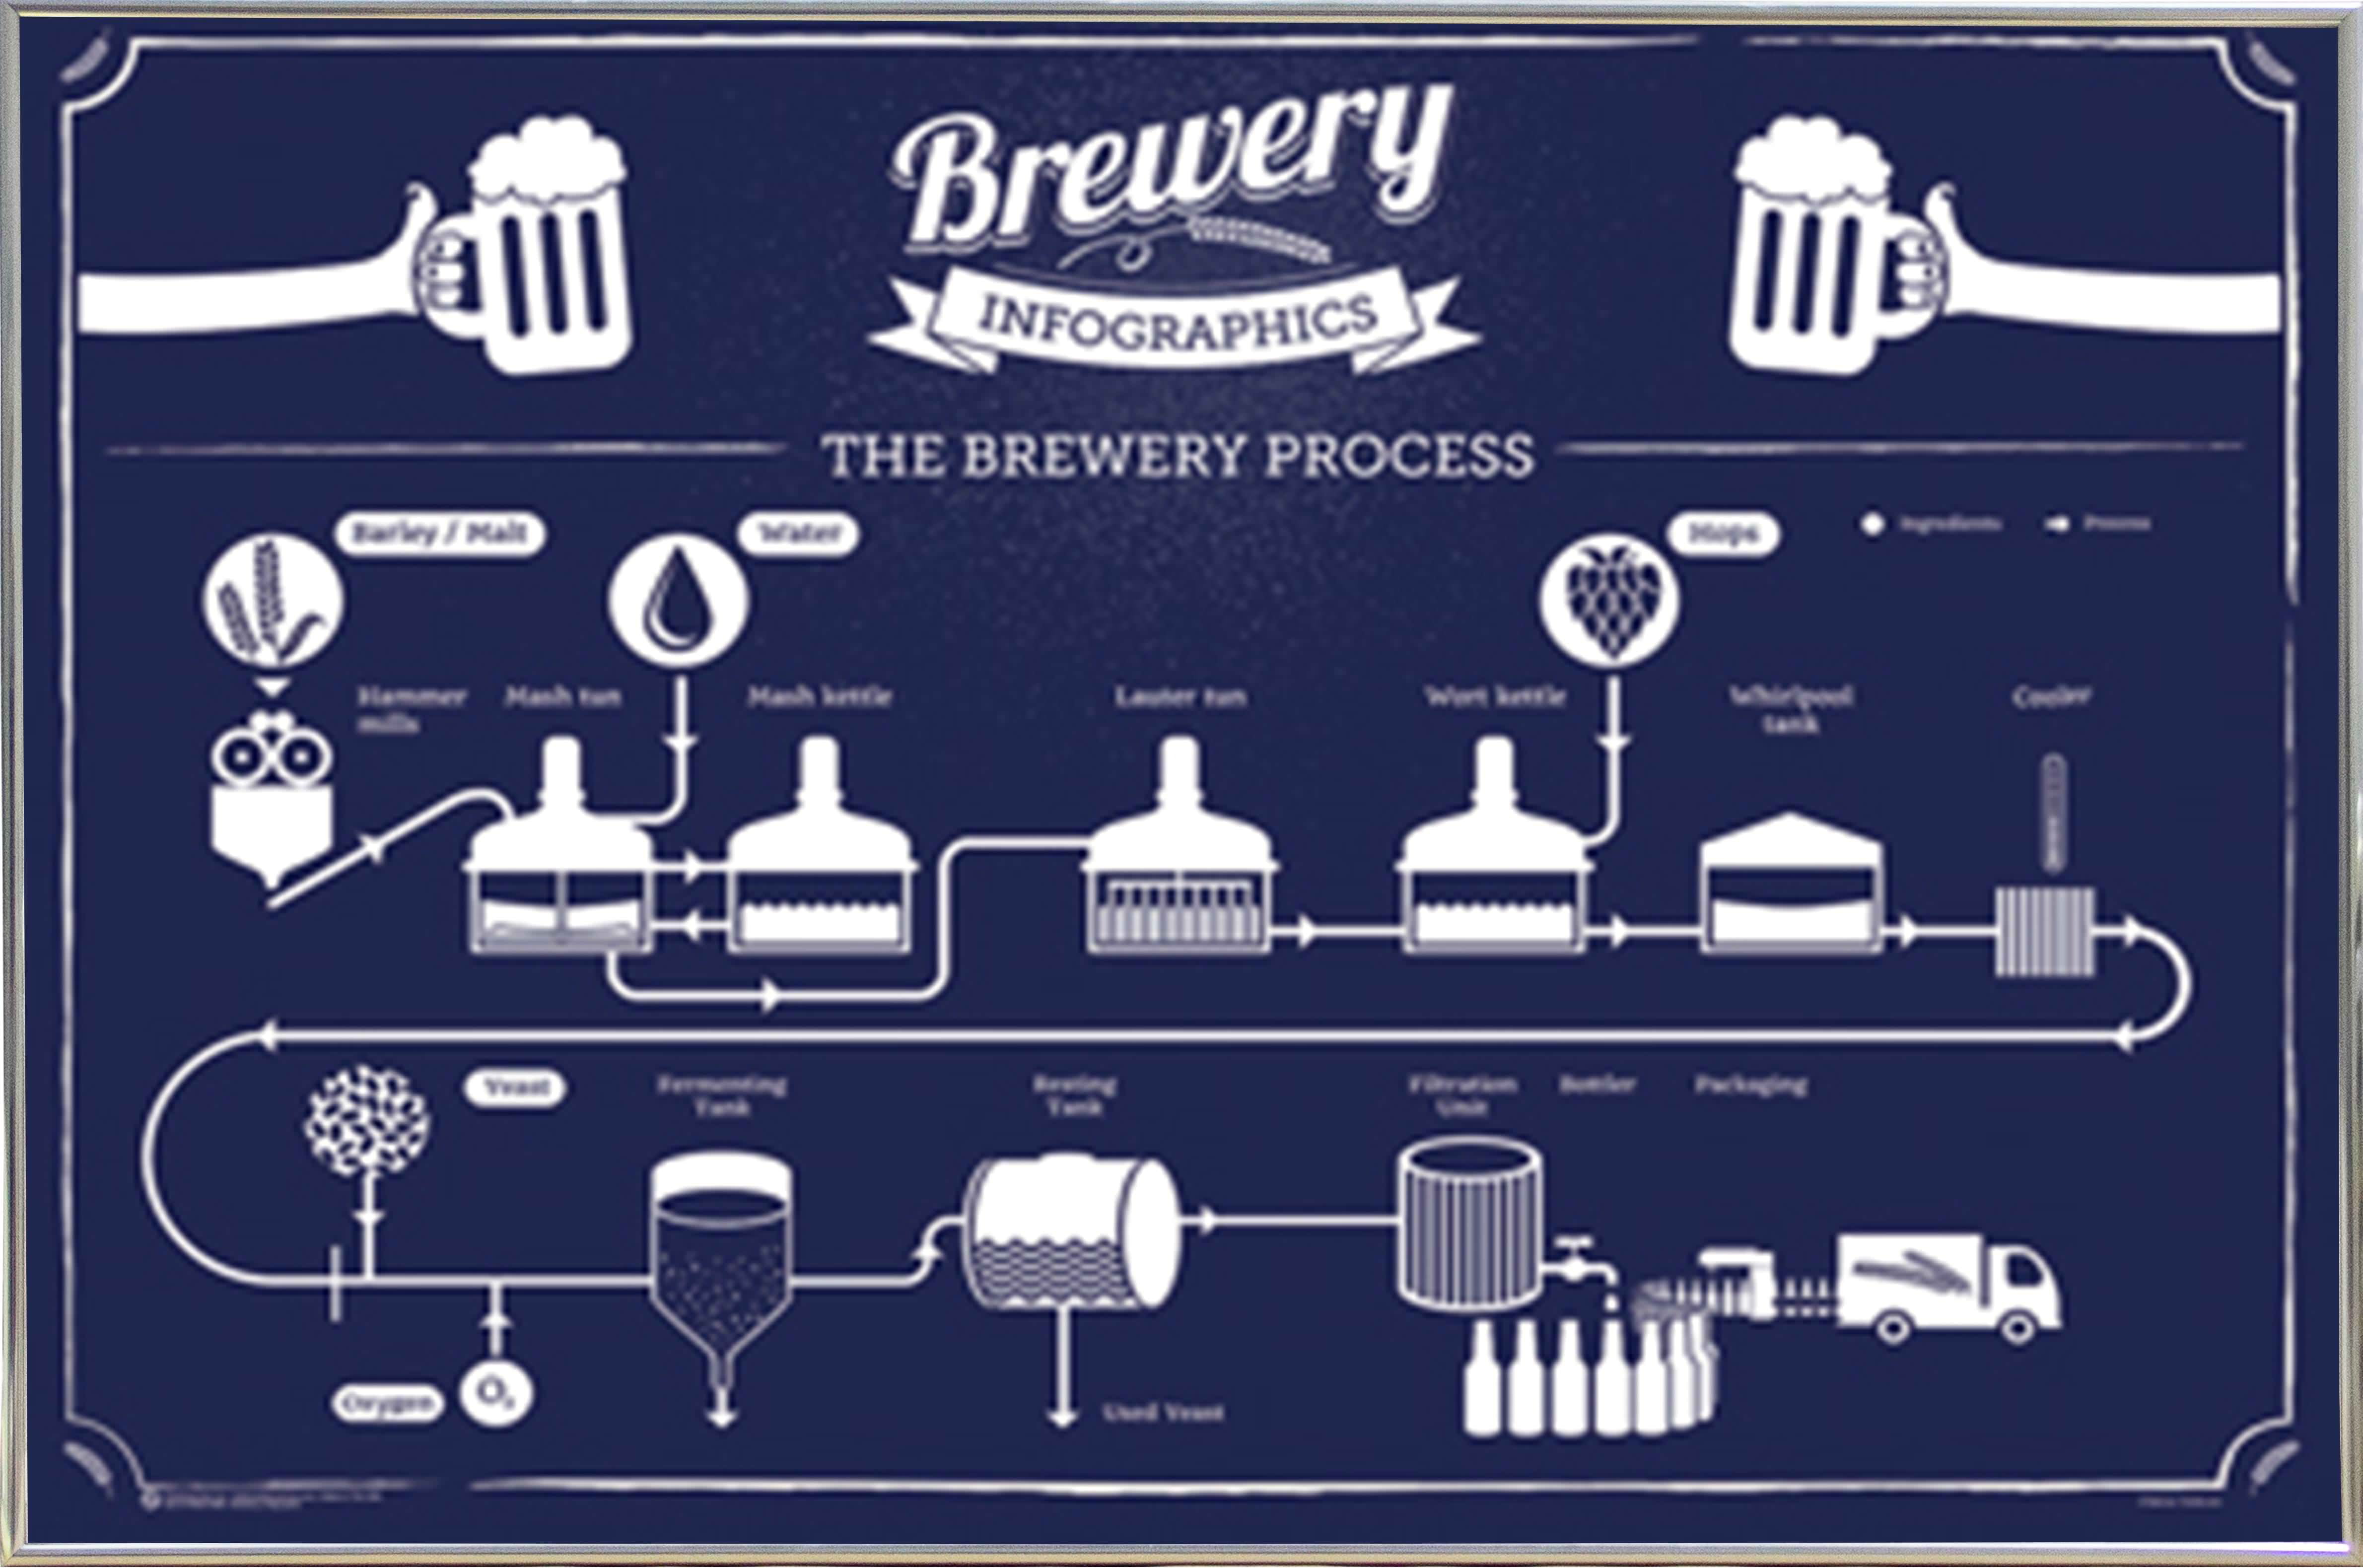 24x36 04189-PSA010565 Frame USA Brewery Infographic Poster in a Black Thin Poster Frame 